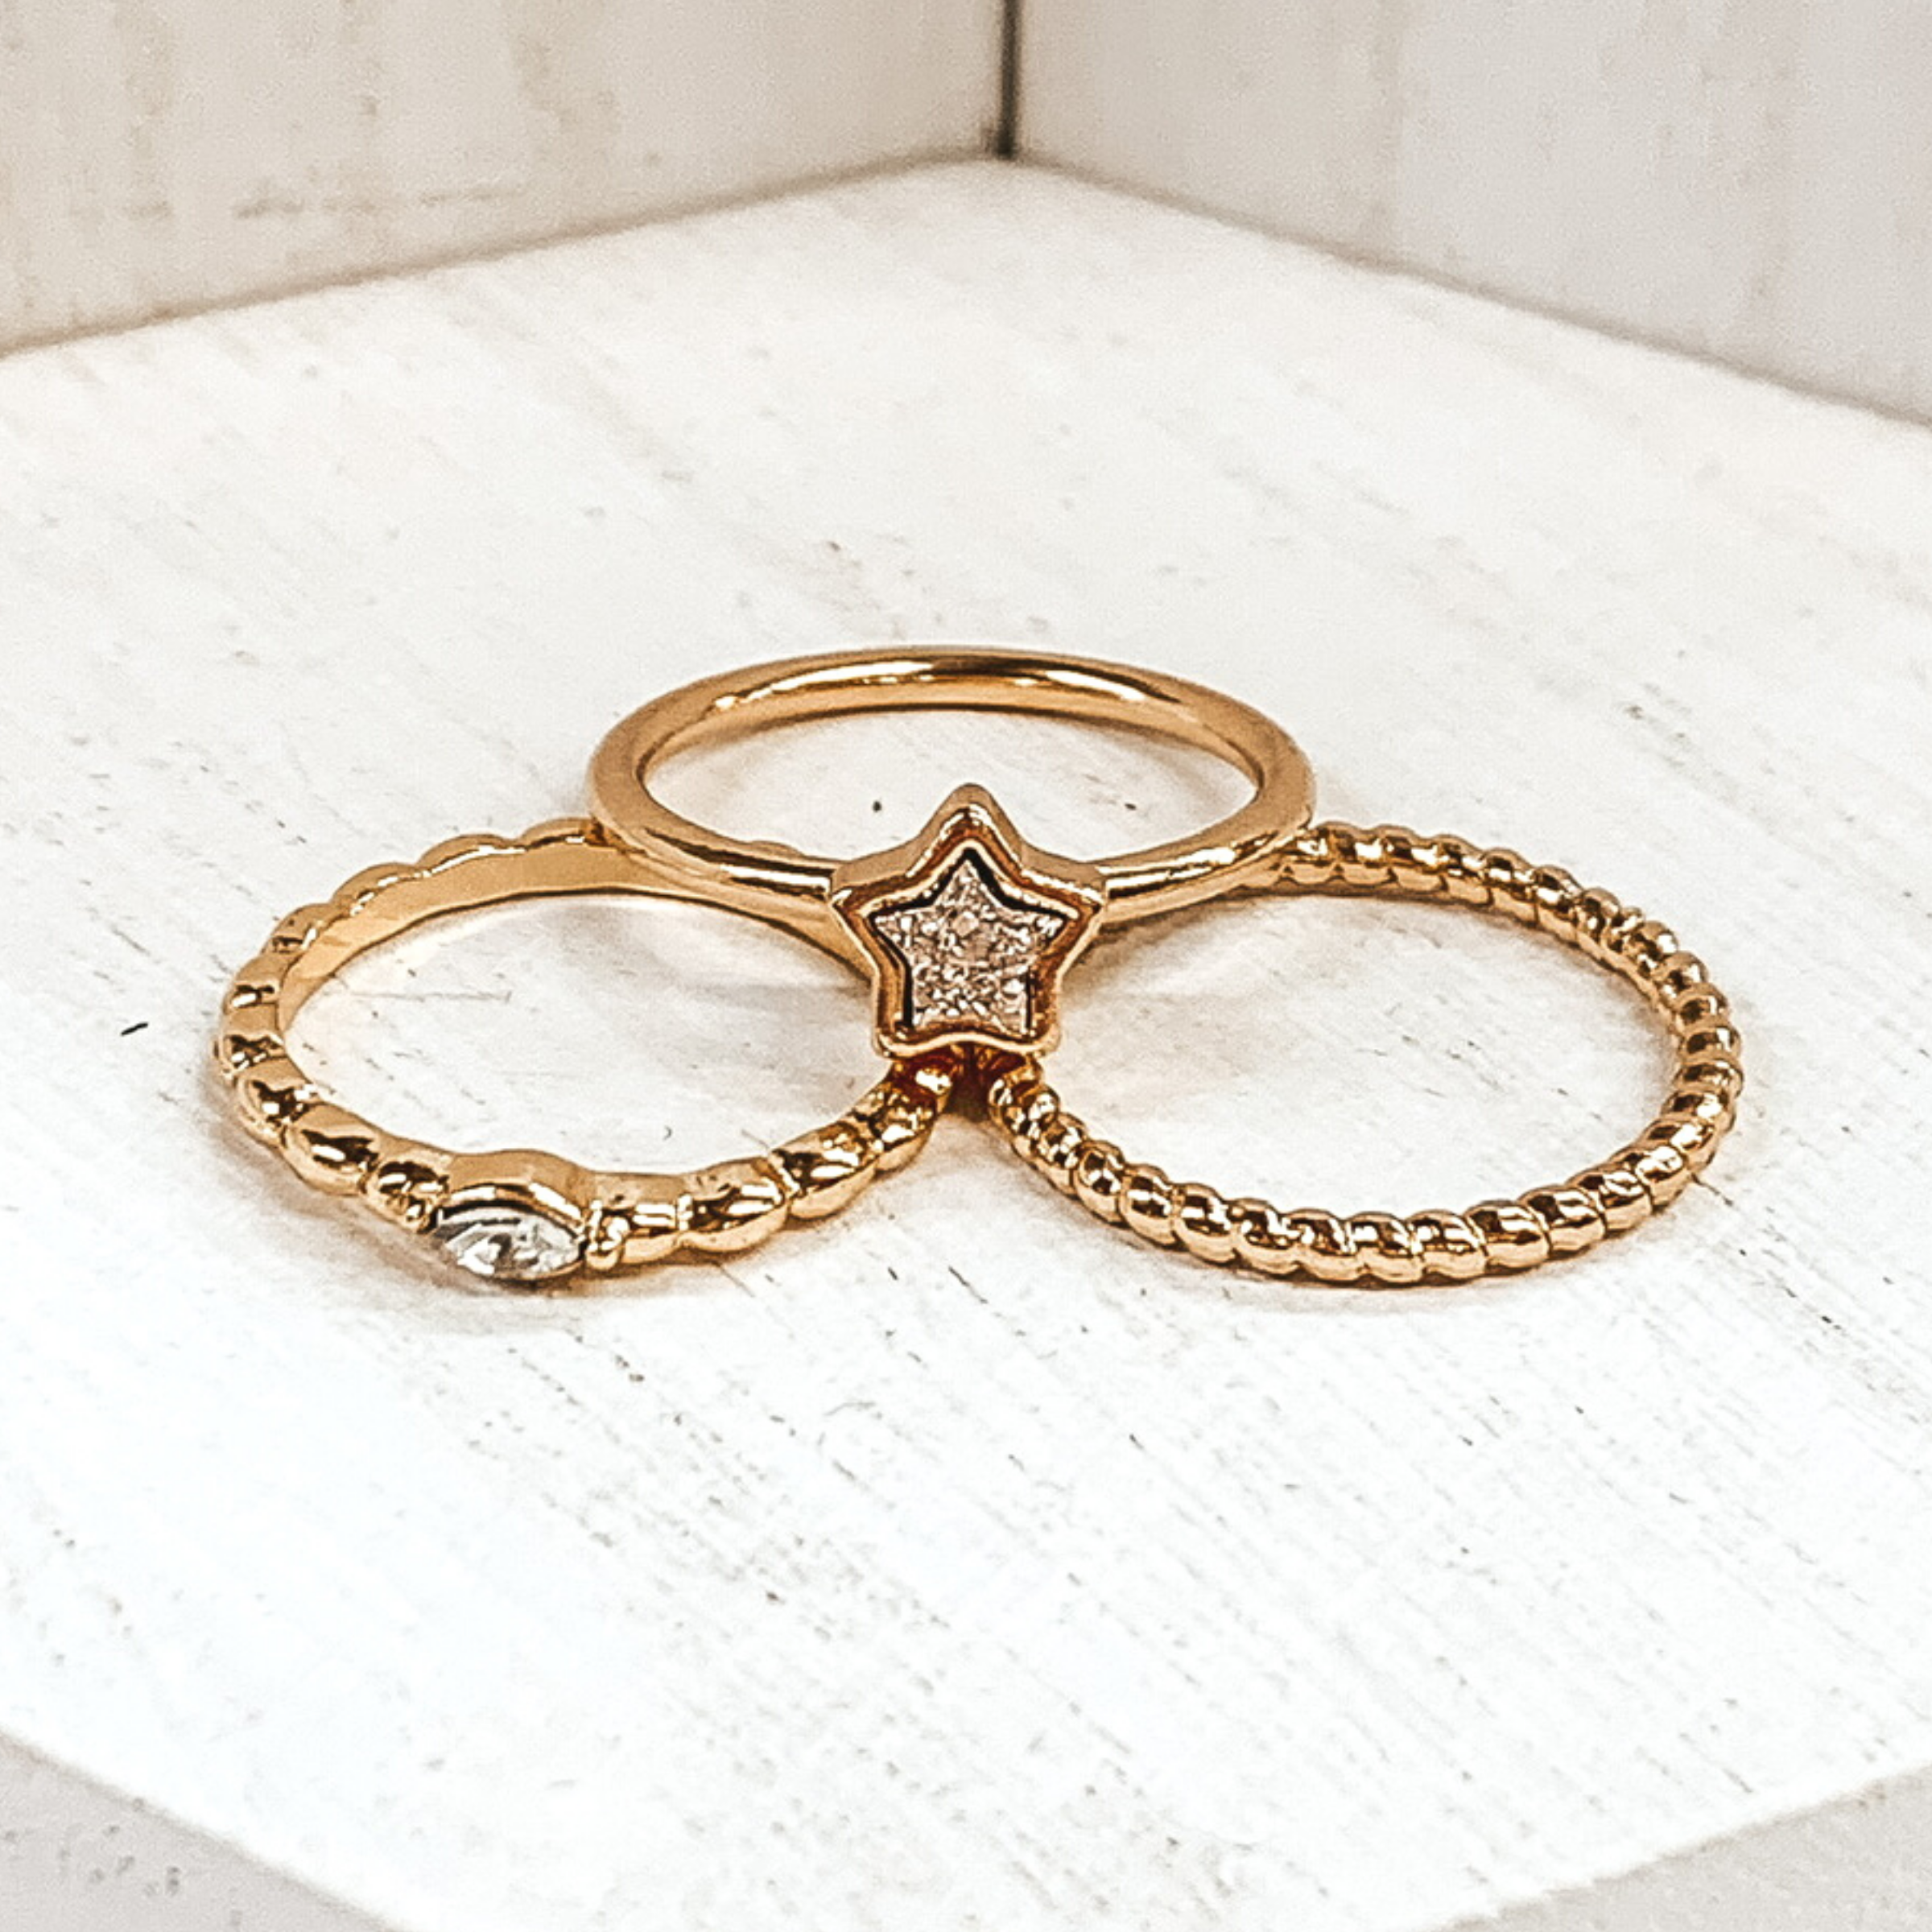 Set of three gold rings. One ring is a twisted texture. Another ring is a bubbled texture with a center oval crystal. The last ring has a plain gold band with a druzy star pendant outlined in gold. These rings are pictured on a white background. 